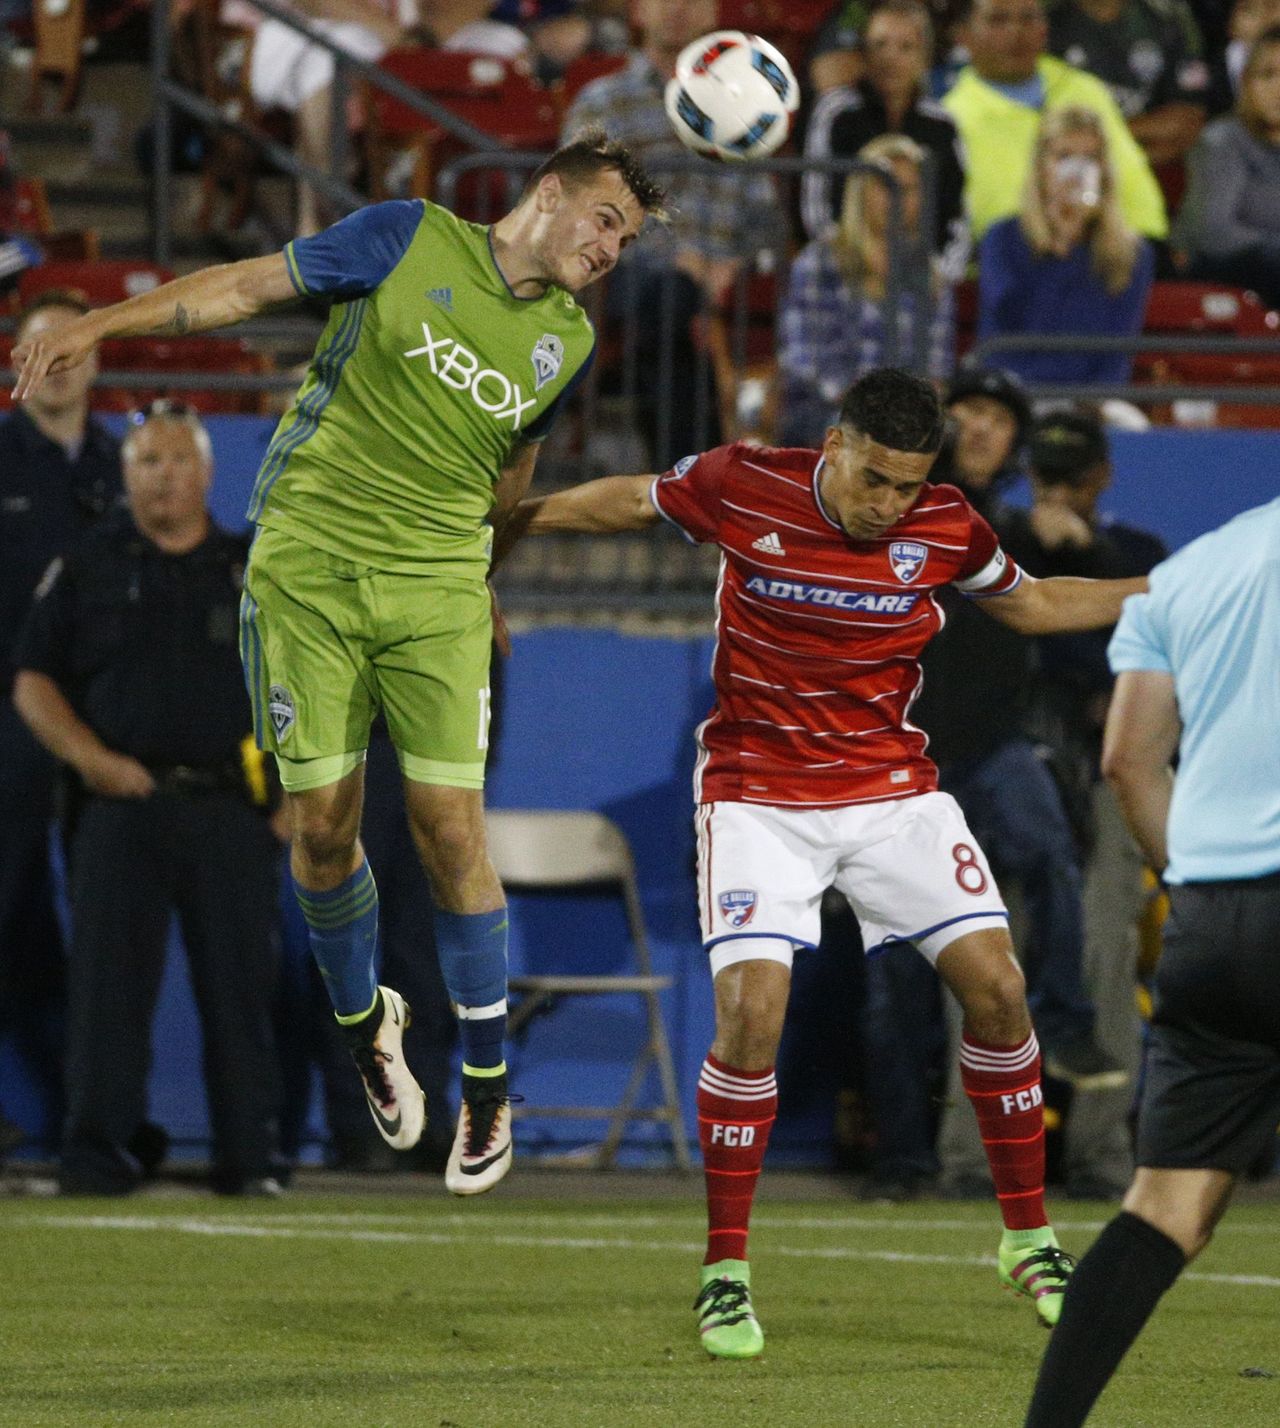 Sounders forward Jordan Morris (left) heads the ball over FC Dallas midfielder Victor Ulloa (8) during the second half of an MLS match on May 14 in Frisco, Texas.